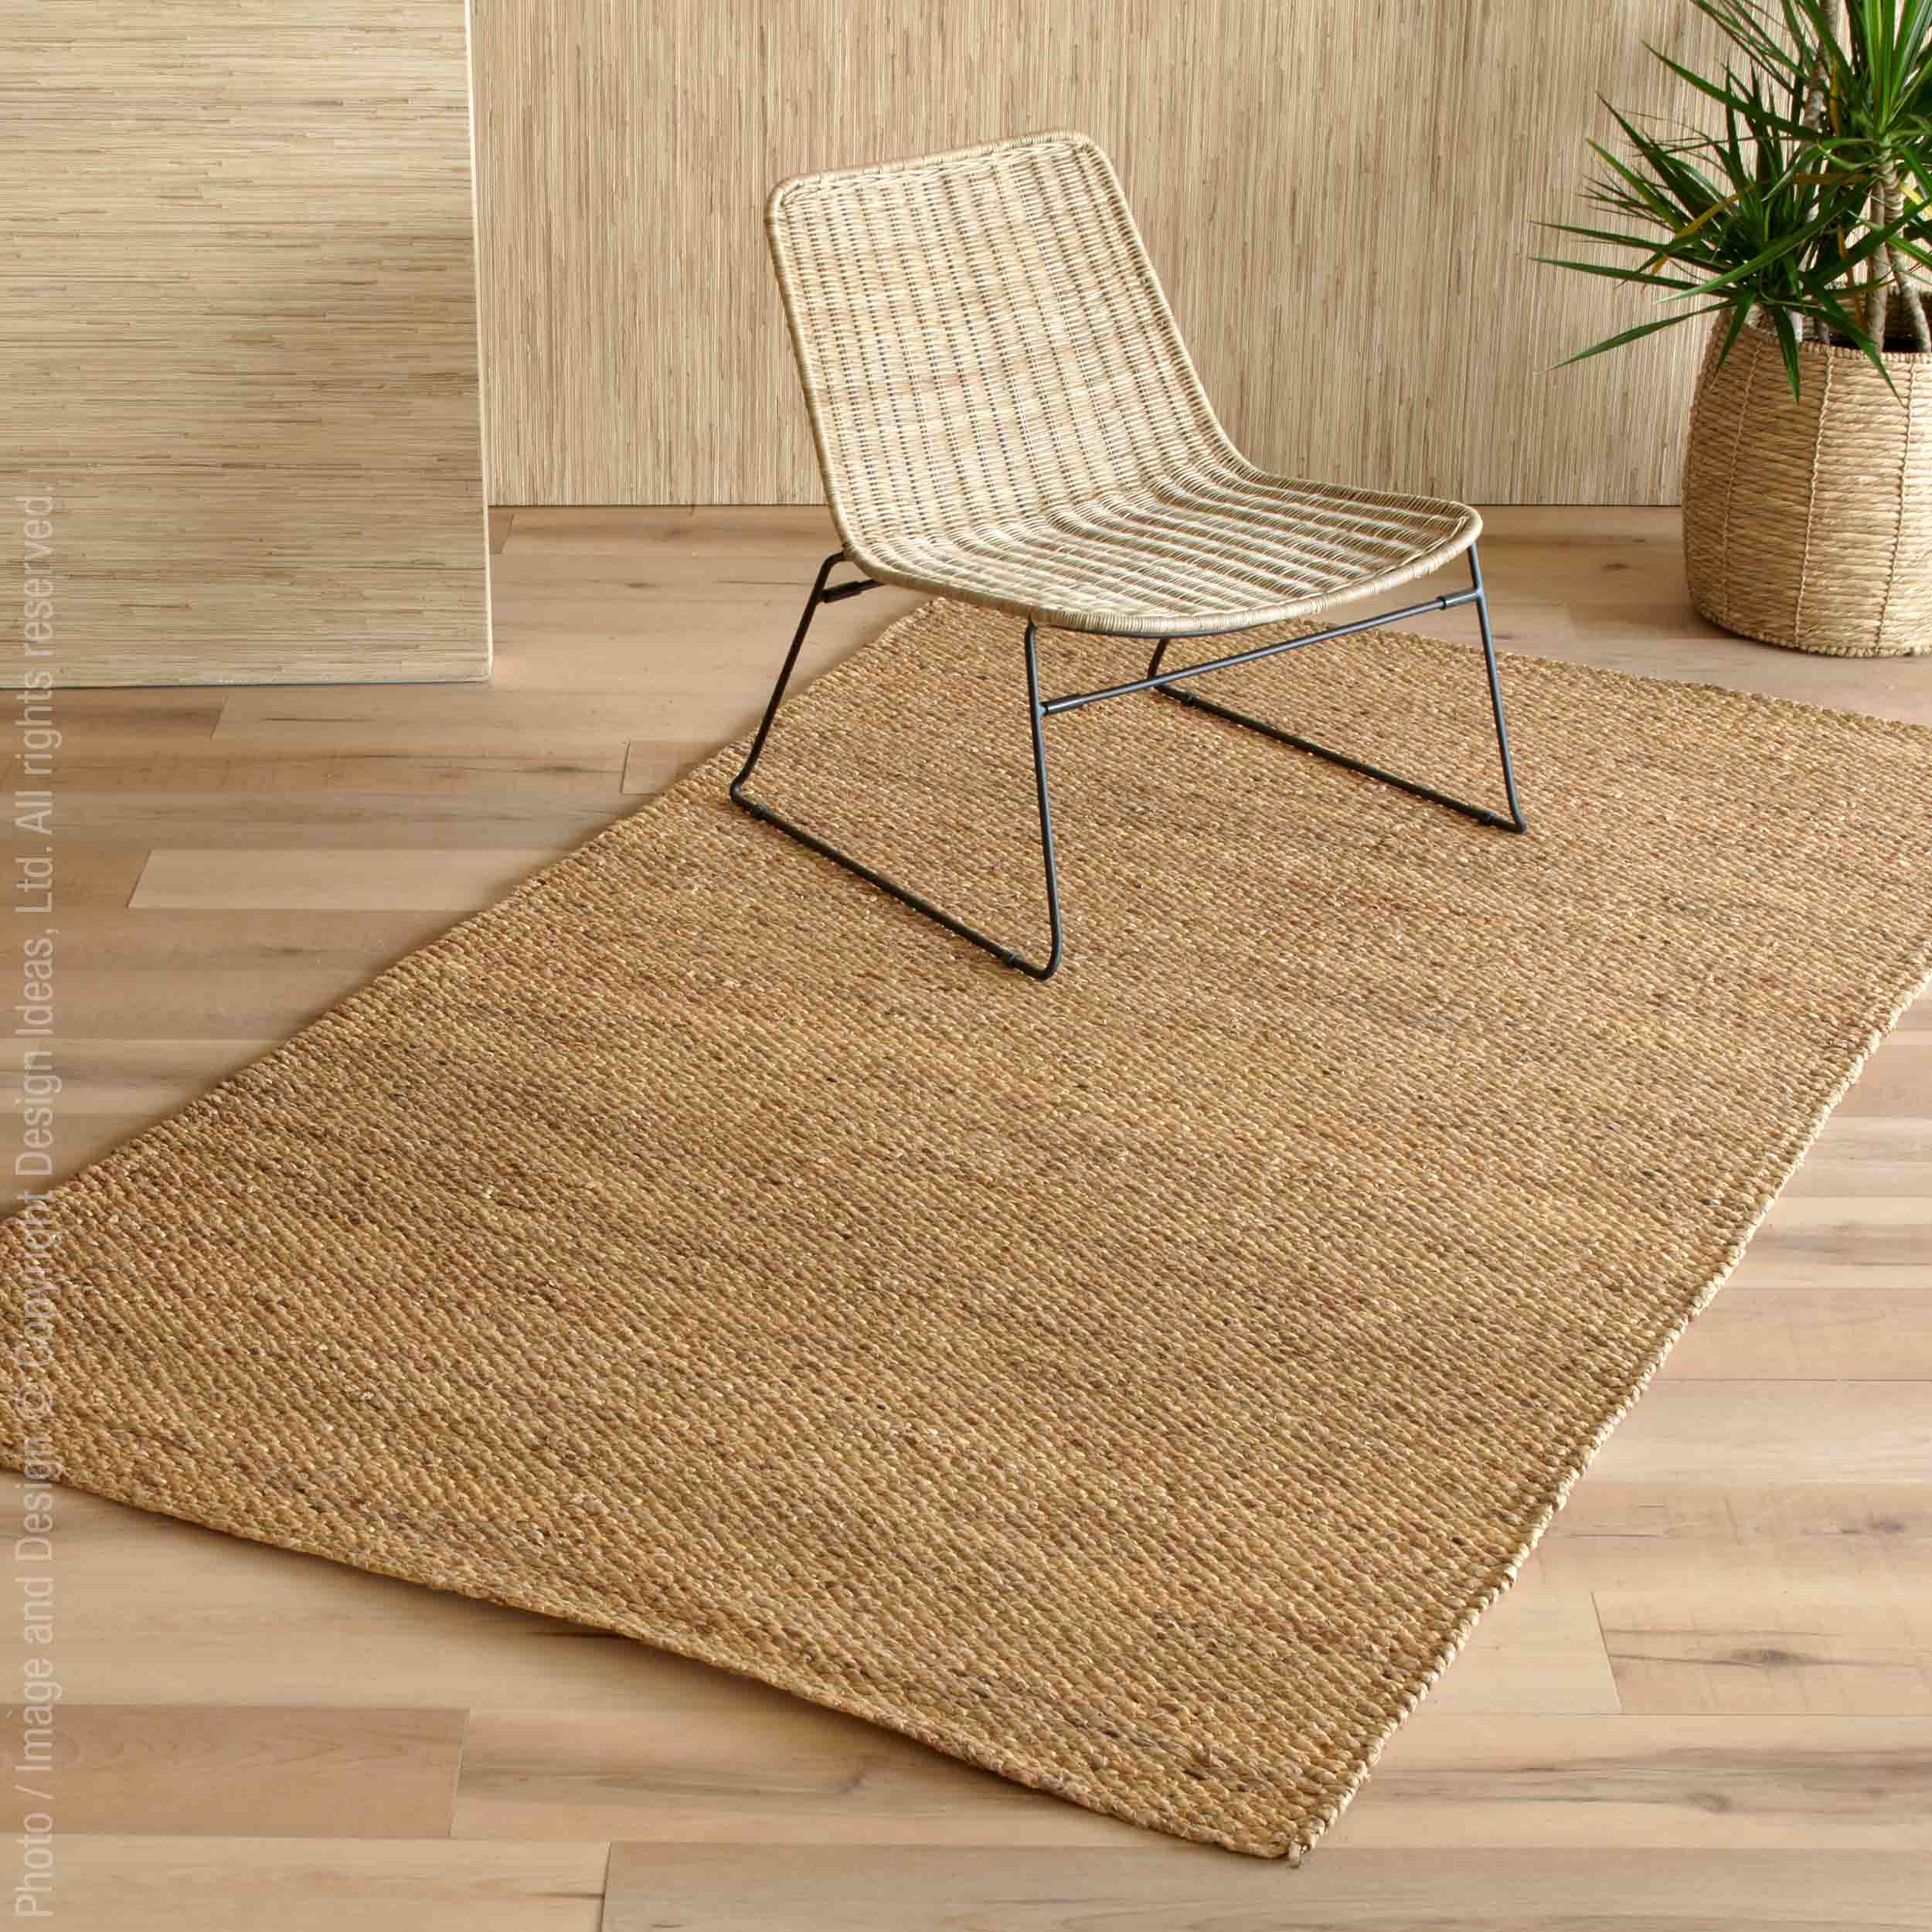 Trieste™ rug (60x96in.) - Natural | Image 1 | Premium Rug from the Trieste collection | made with Water Hyacinth Twine for long lasting use | texxture